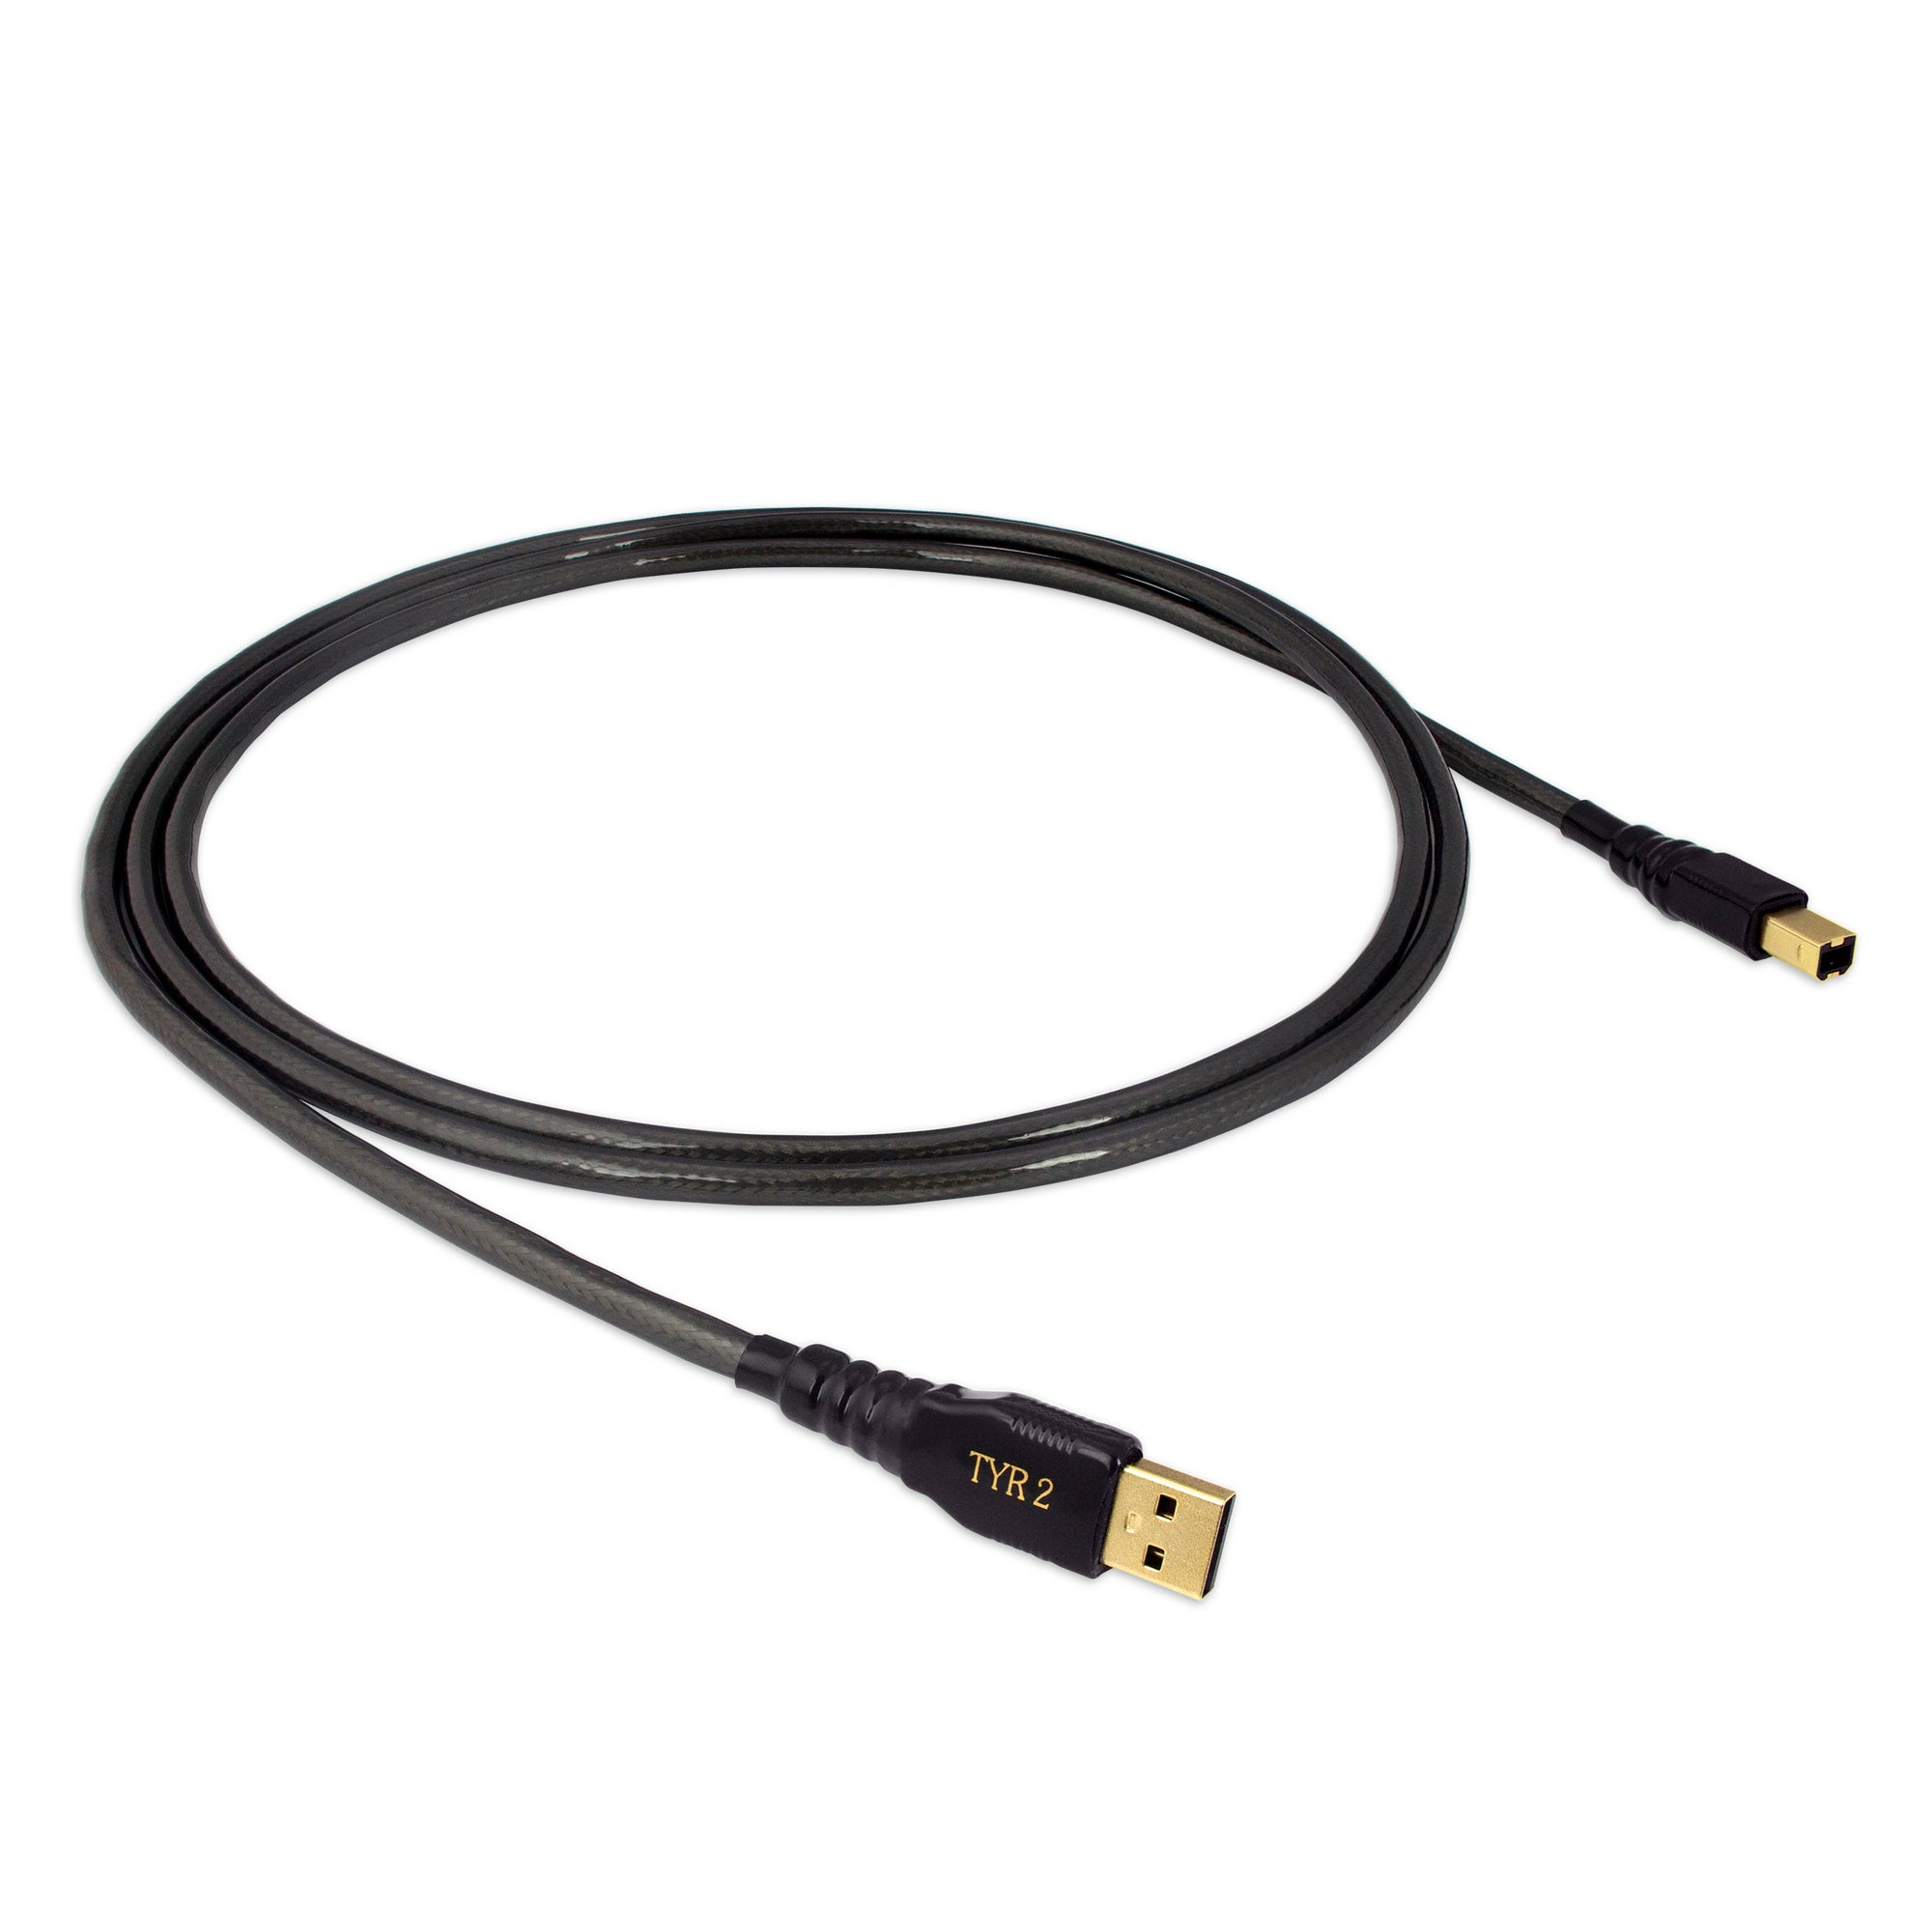 Nordost Norse 2 TYR USB 2 Cable - Suncoast Audio